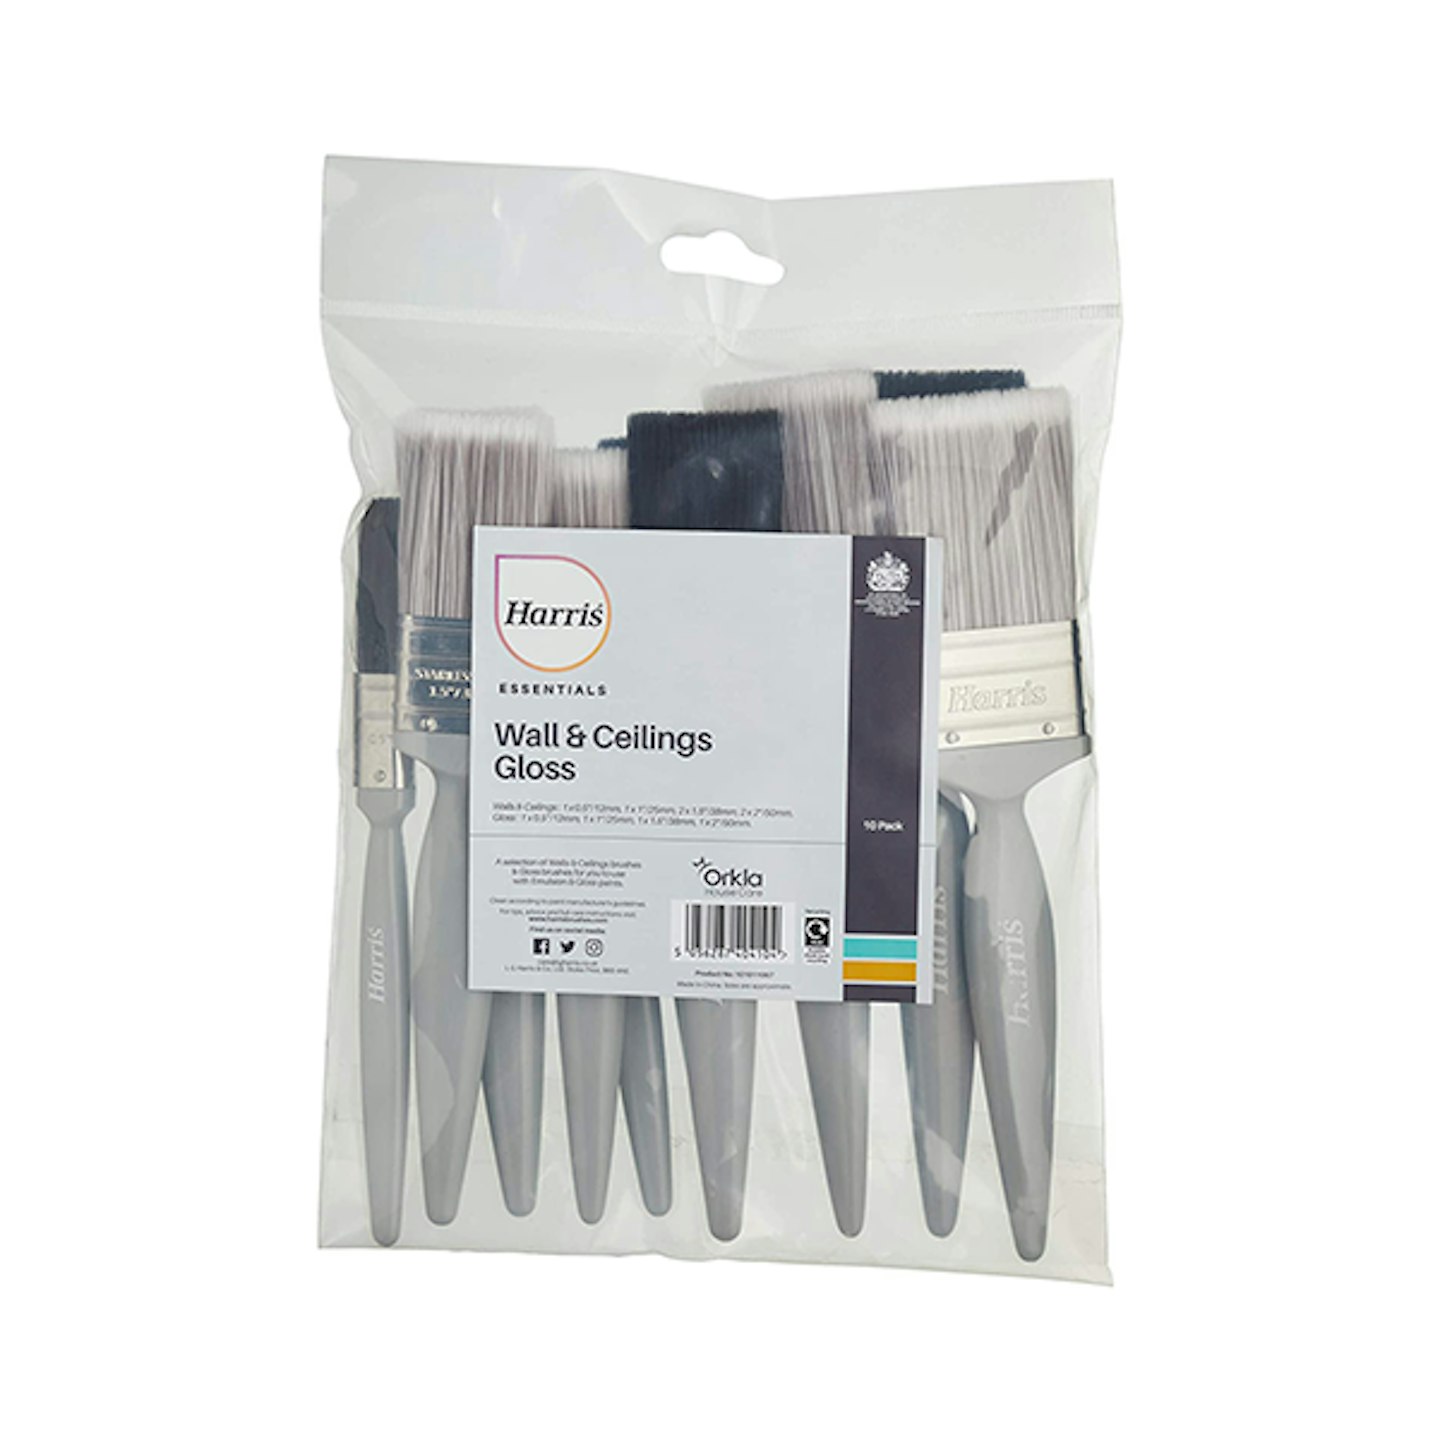 Harris Essentials Walls & Ceilings and Woodwork 10 Pack, 0, 1 x 1.5, 1 x 2 Gloss 1 x 0.5, 1 x 1, 2 x 1.5, 2X 2 Emulsion Paint Brushes